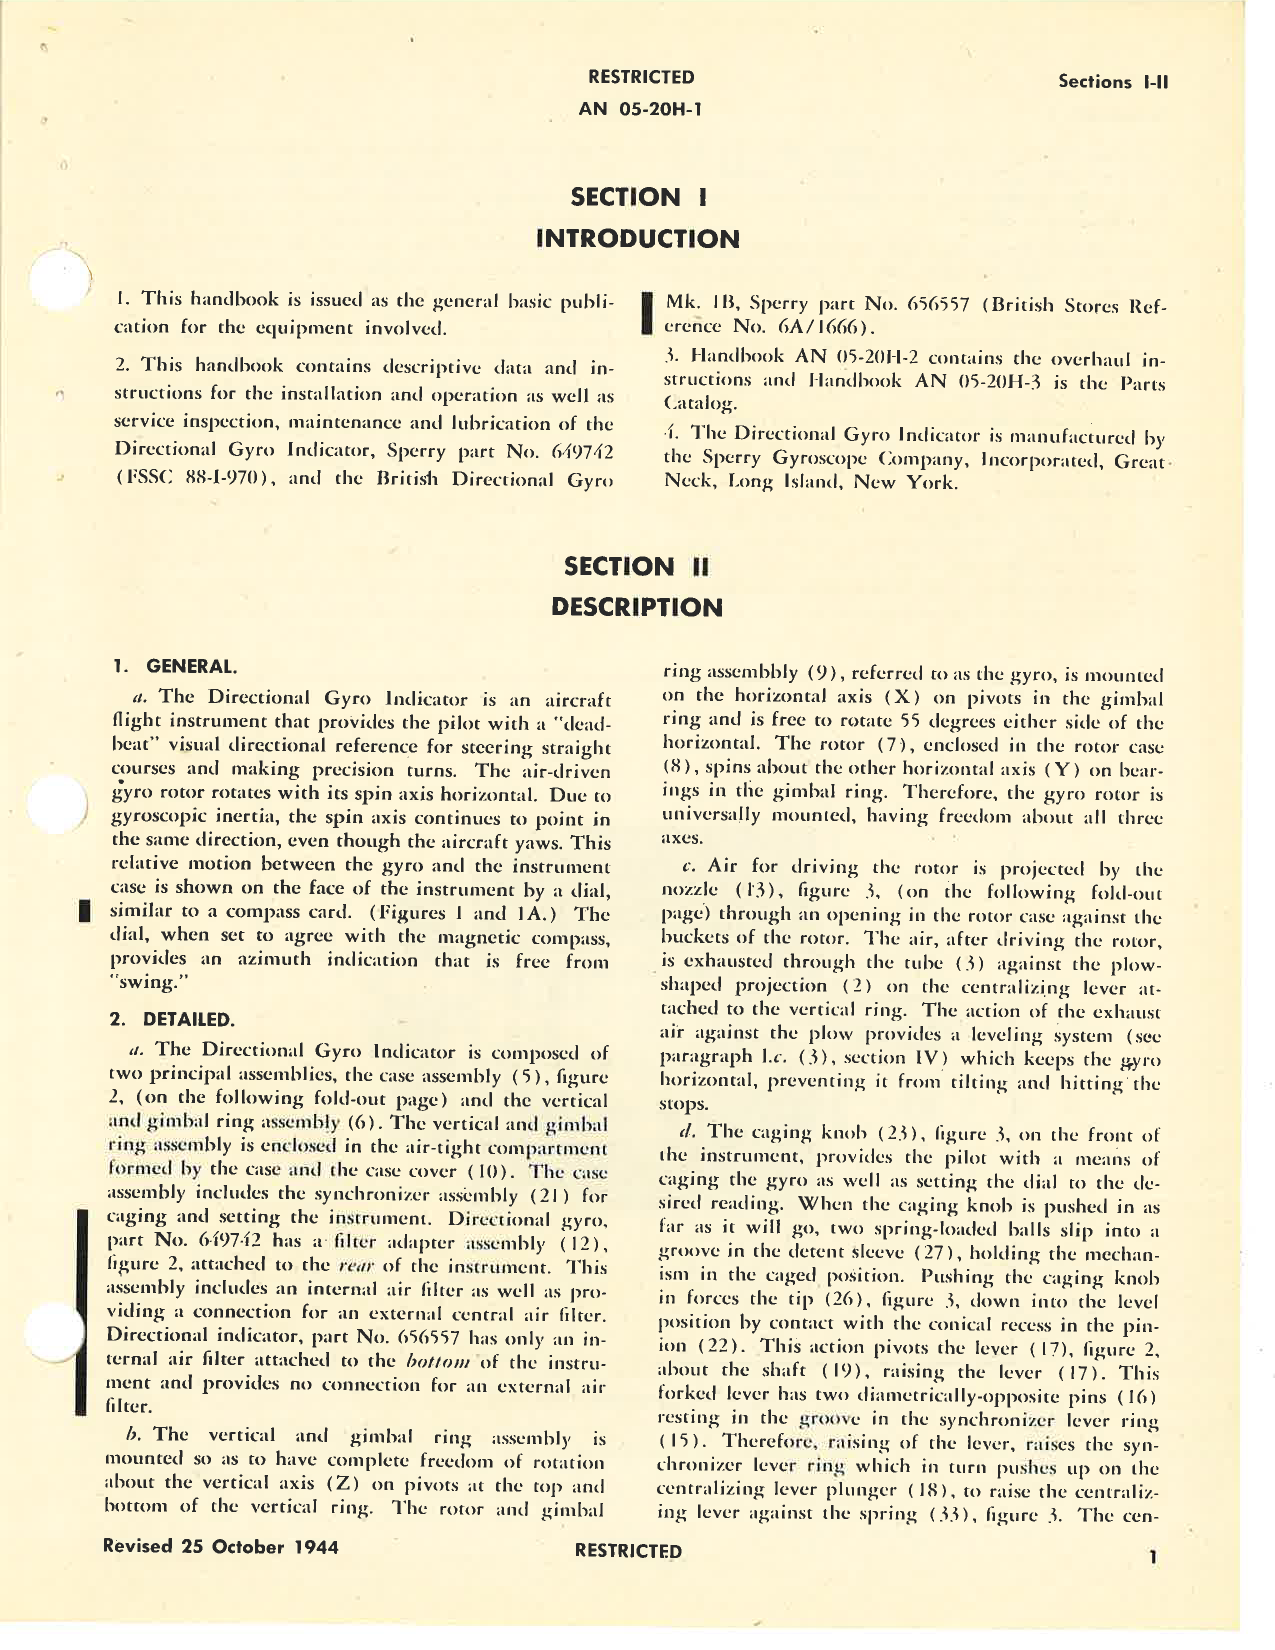 Sample page 5 from AirCorps Library document: Operation and Service Instructions for Directional Gyro Indicators Type AN 5735-1